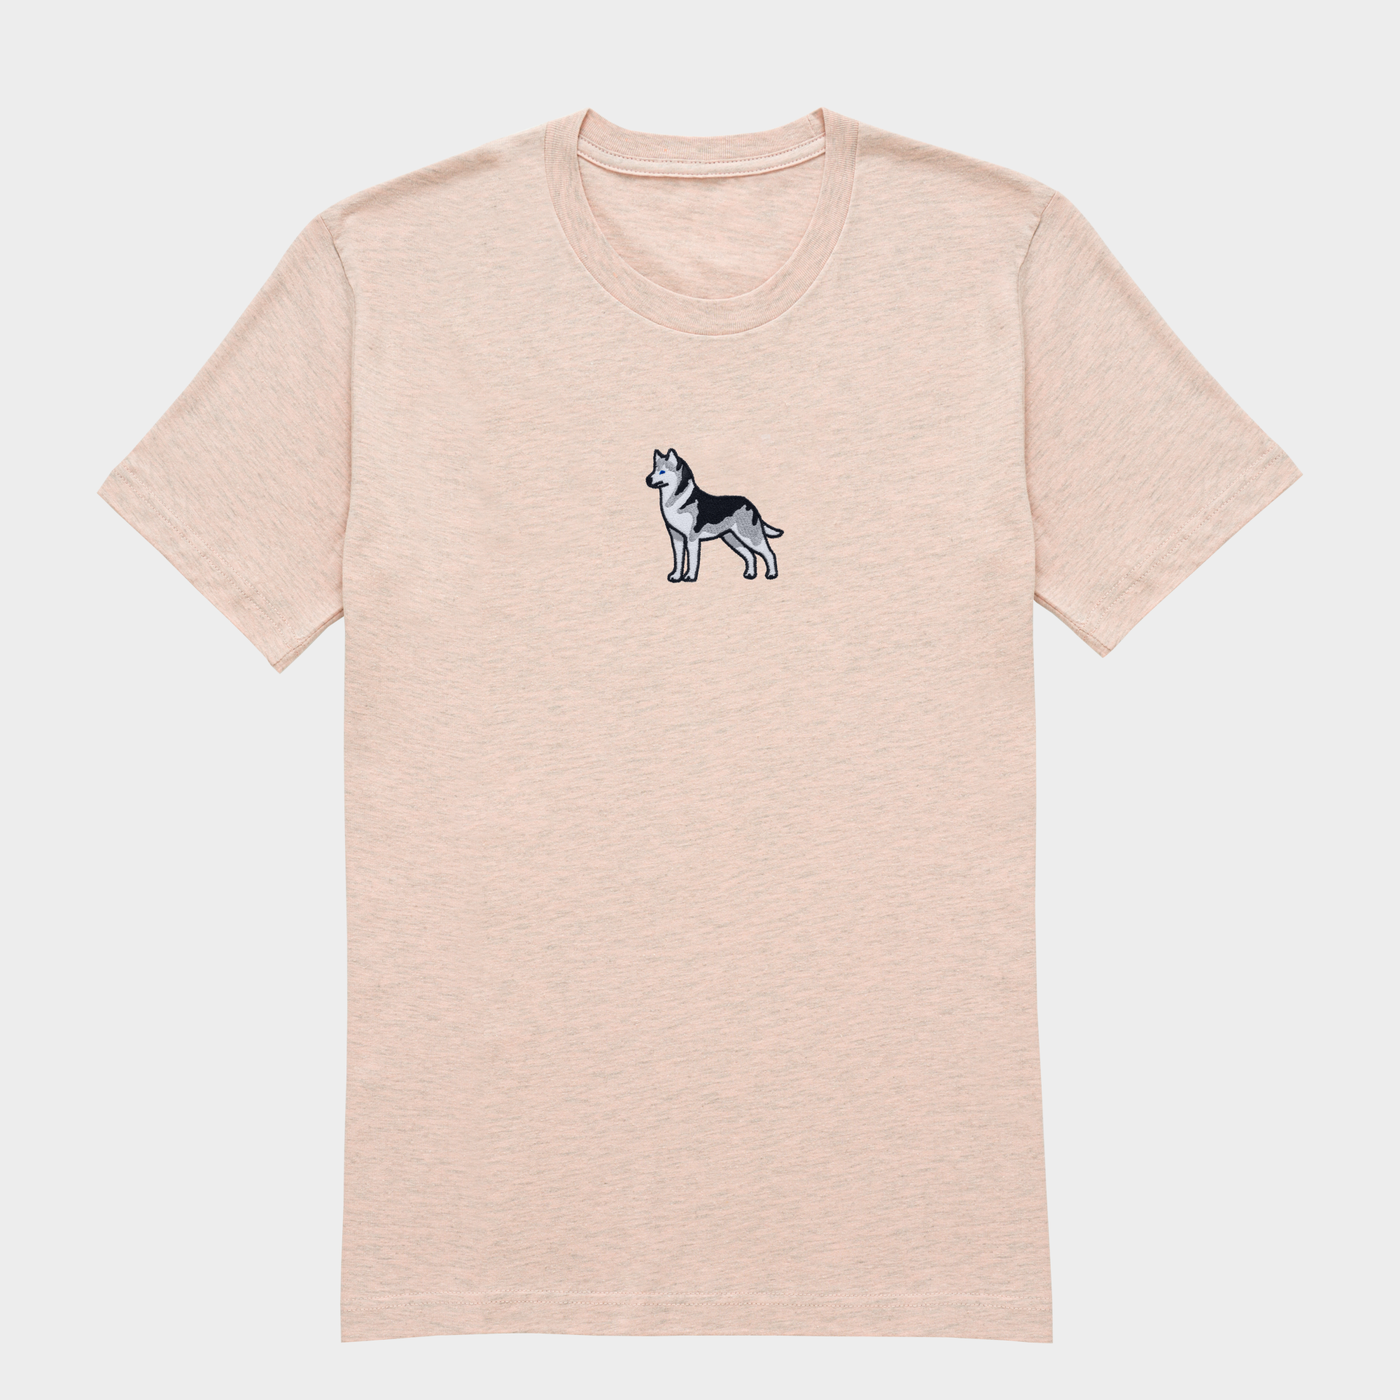 Bobby's Planet Women's Embroidered Siberian Husky T-Shirt from Paws Dog Cat Animals Collection in Heather Prism Peach Color#color_heather-prism-peach